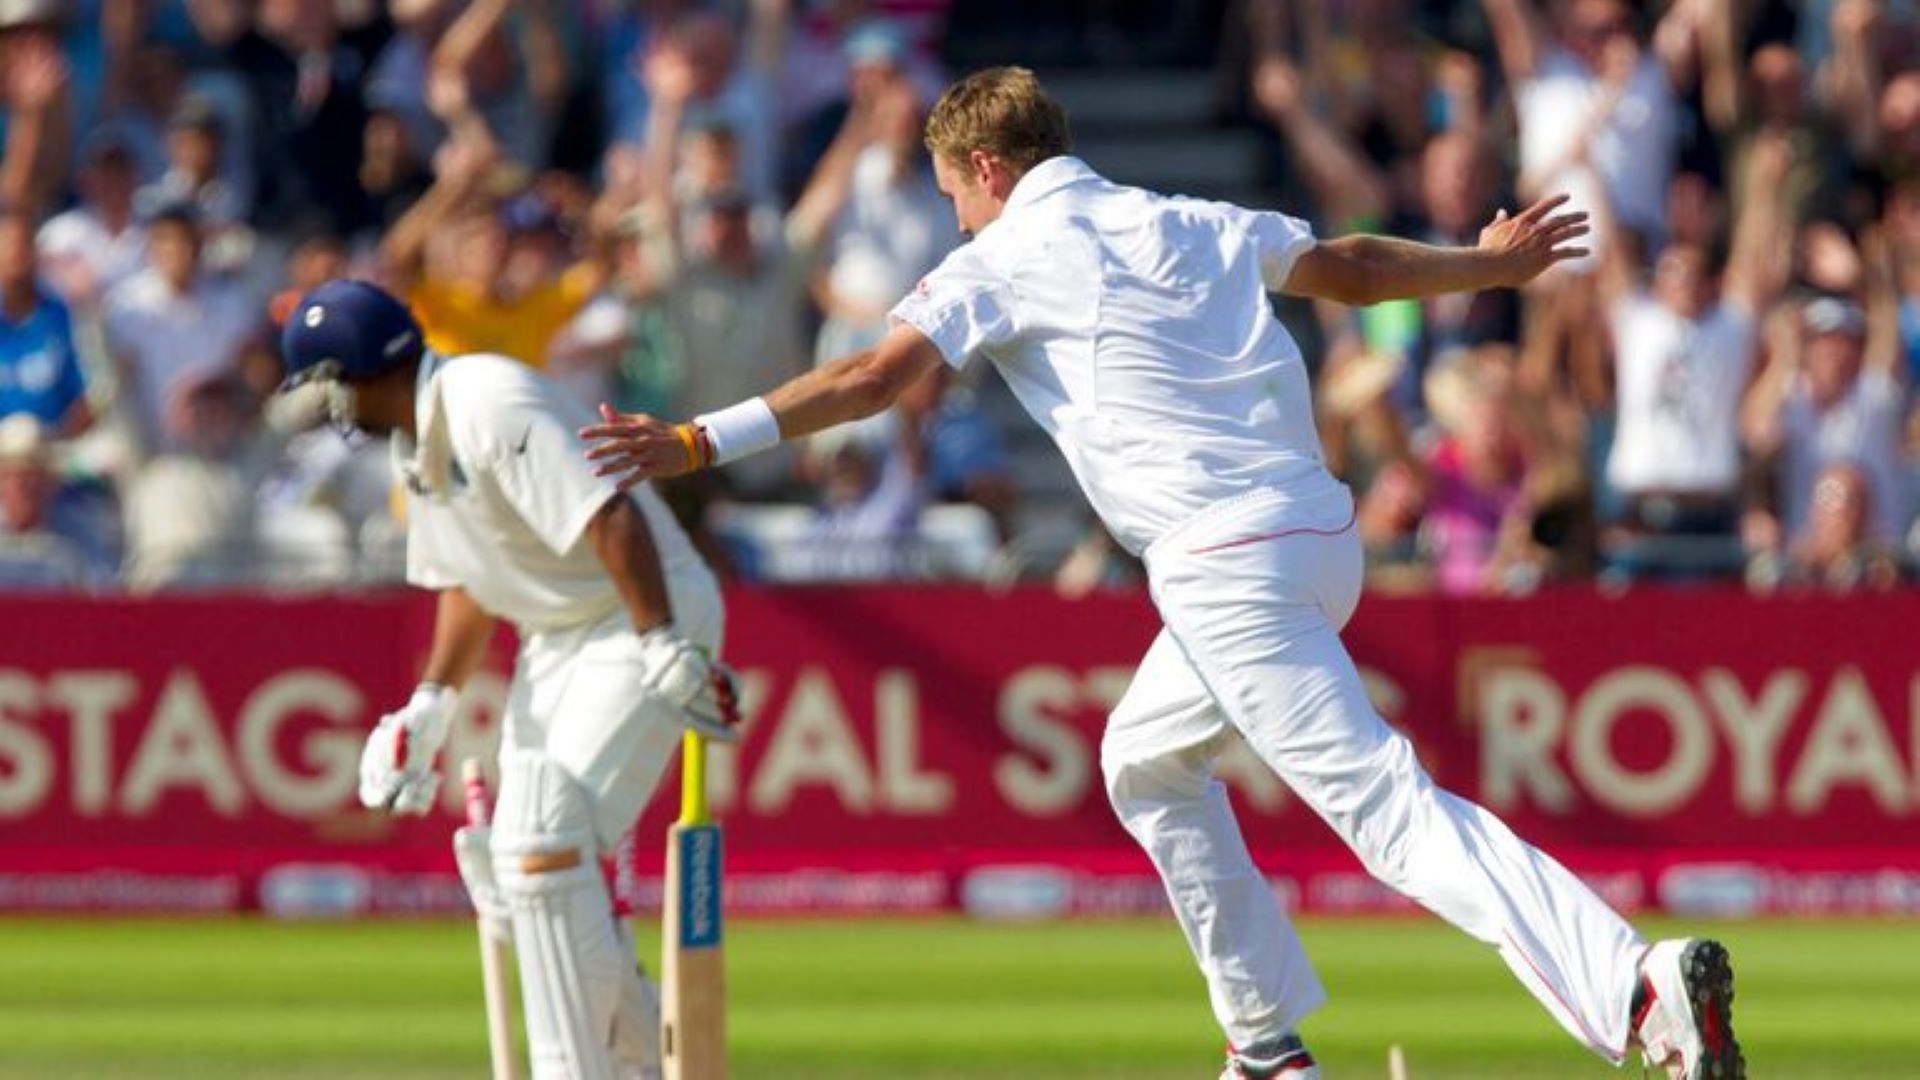 Broad wrecked the Indian batting in the second Test of the 2011 series